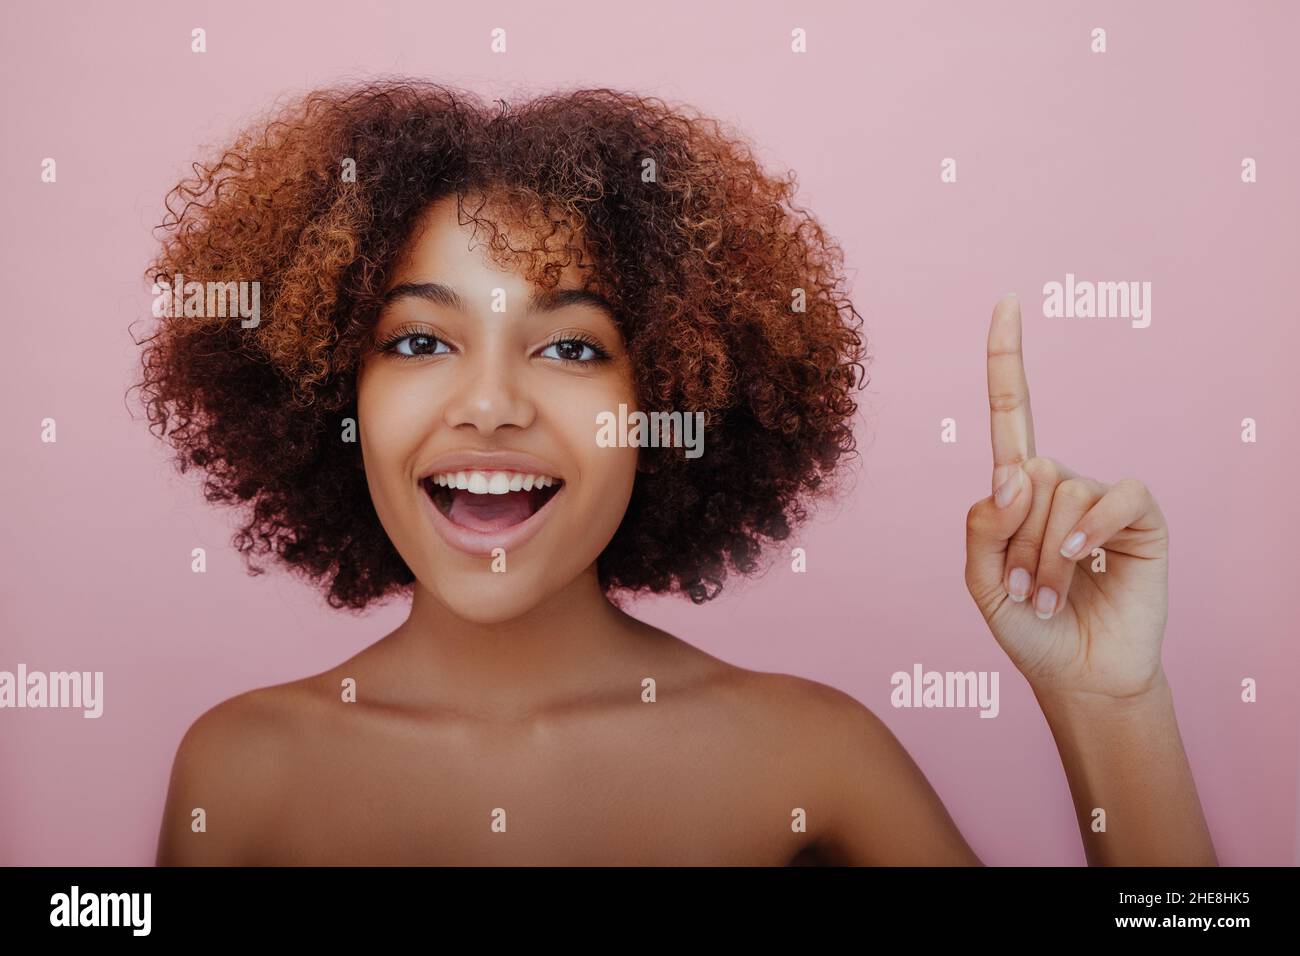 Young beautiful African-American woman with a lush curly hairstyle points her index finger up looks at the camera and smiles on a pink background, a new idea has come, inspiration Stock Photo